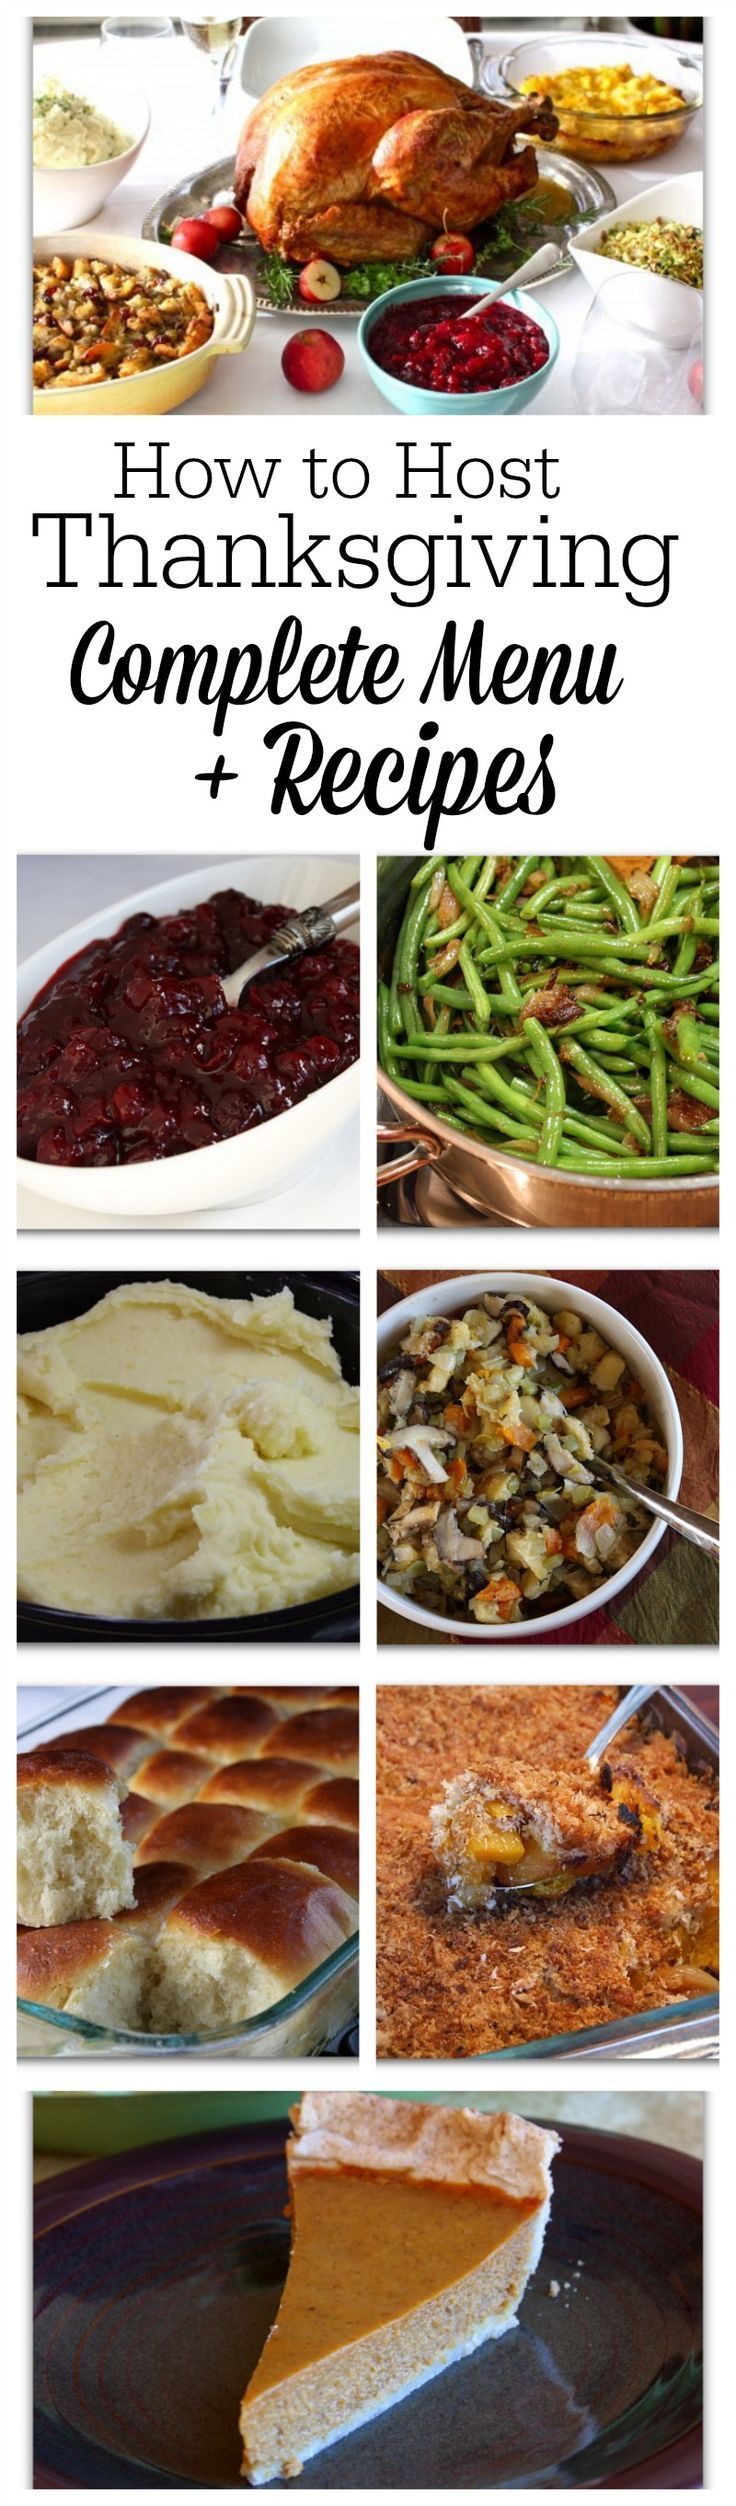 Traditional Southern Thanksgiving Dinner Menu
 A Traditional Thanksgiving Dinner Menu 10 Recipes